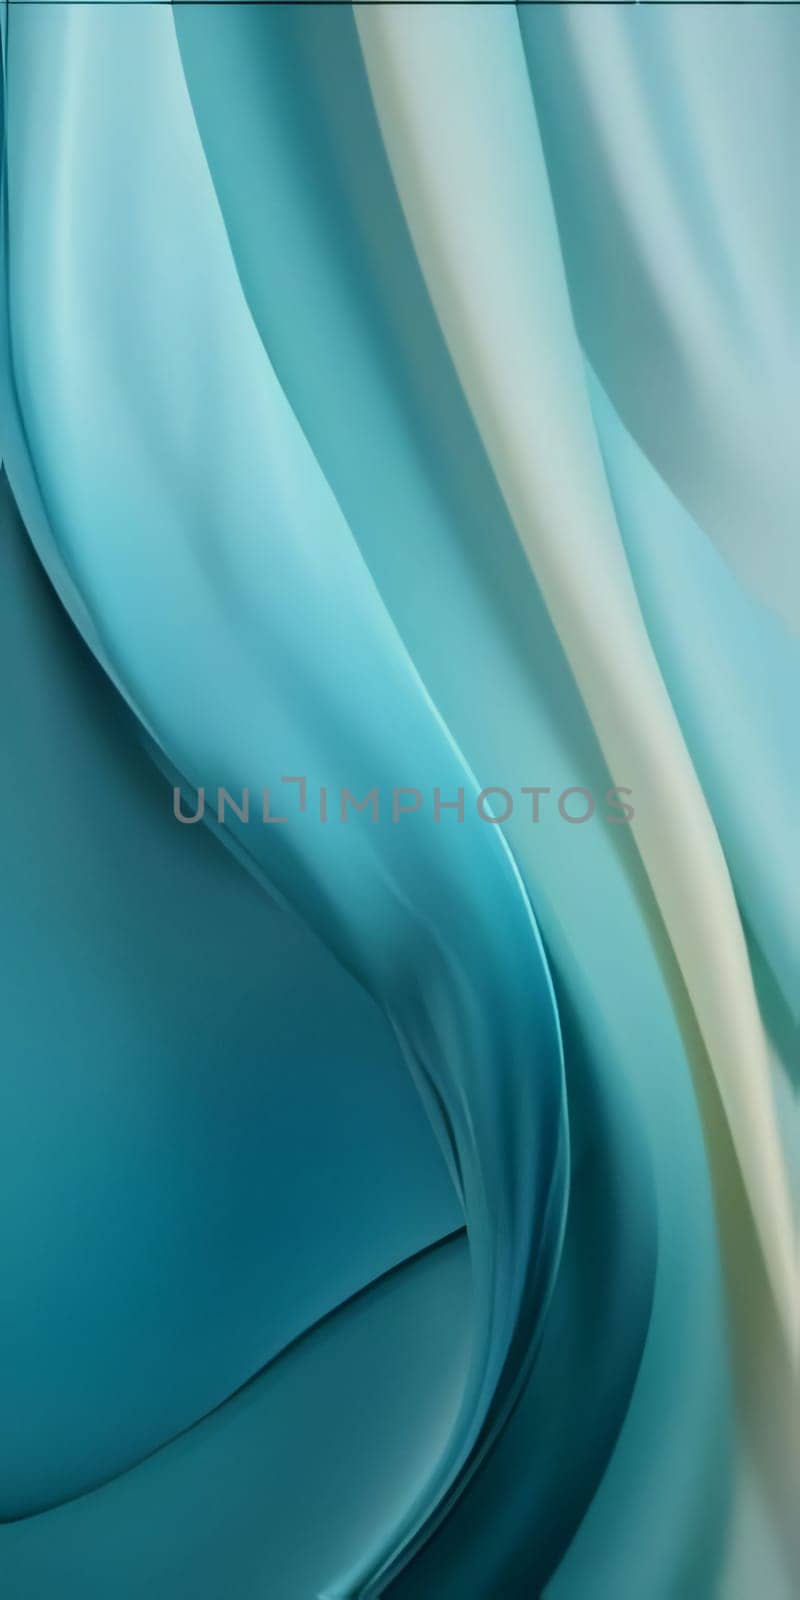 abstract background of blue silk or satin with some smooth lines in it by ThemesS